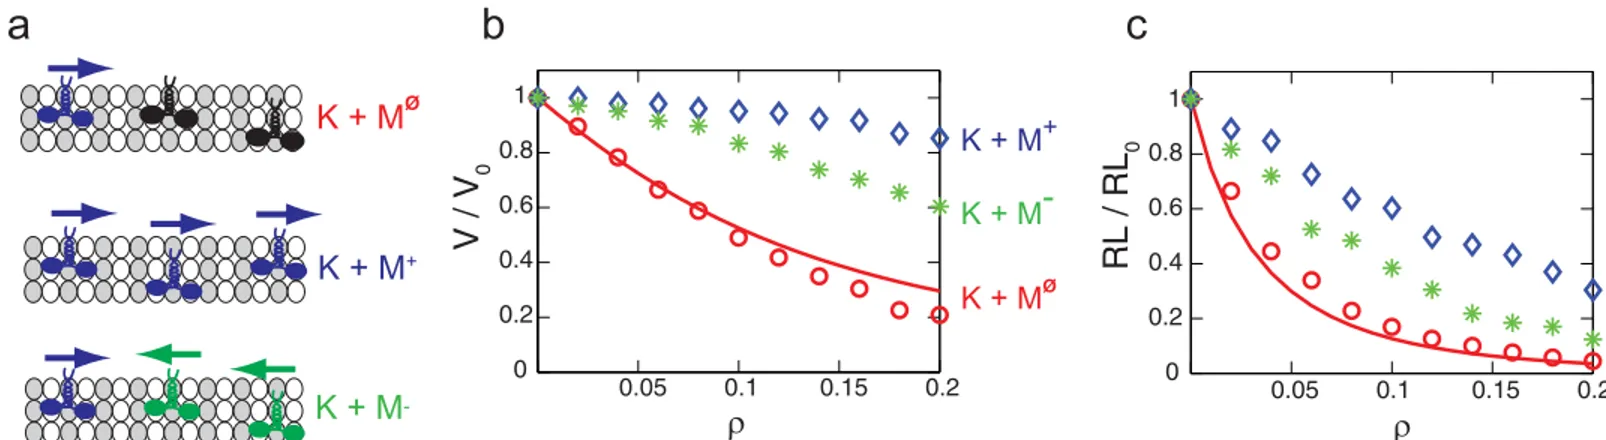 Fig 9. The velocity and run length of kinesins over the density of motors. (a) depicts the motions of the kinesin in (K + M Φ ), (K + M + ), and (K + M − ) situations